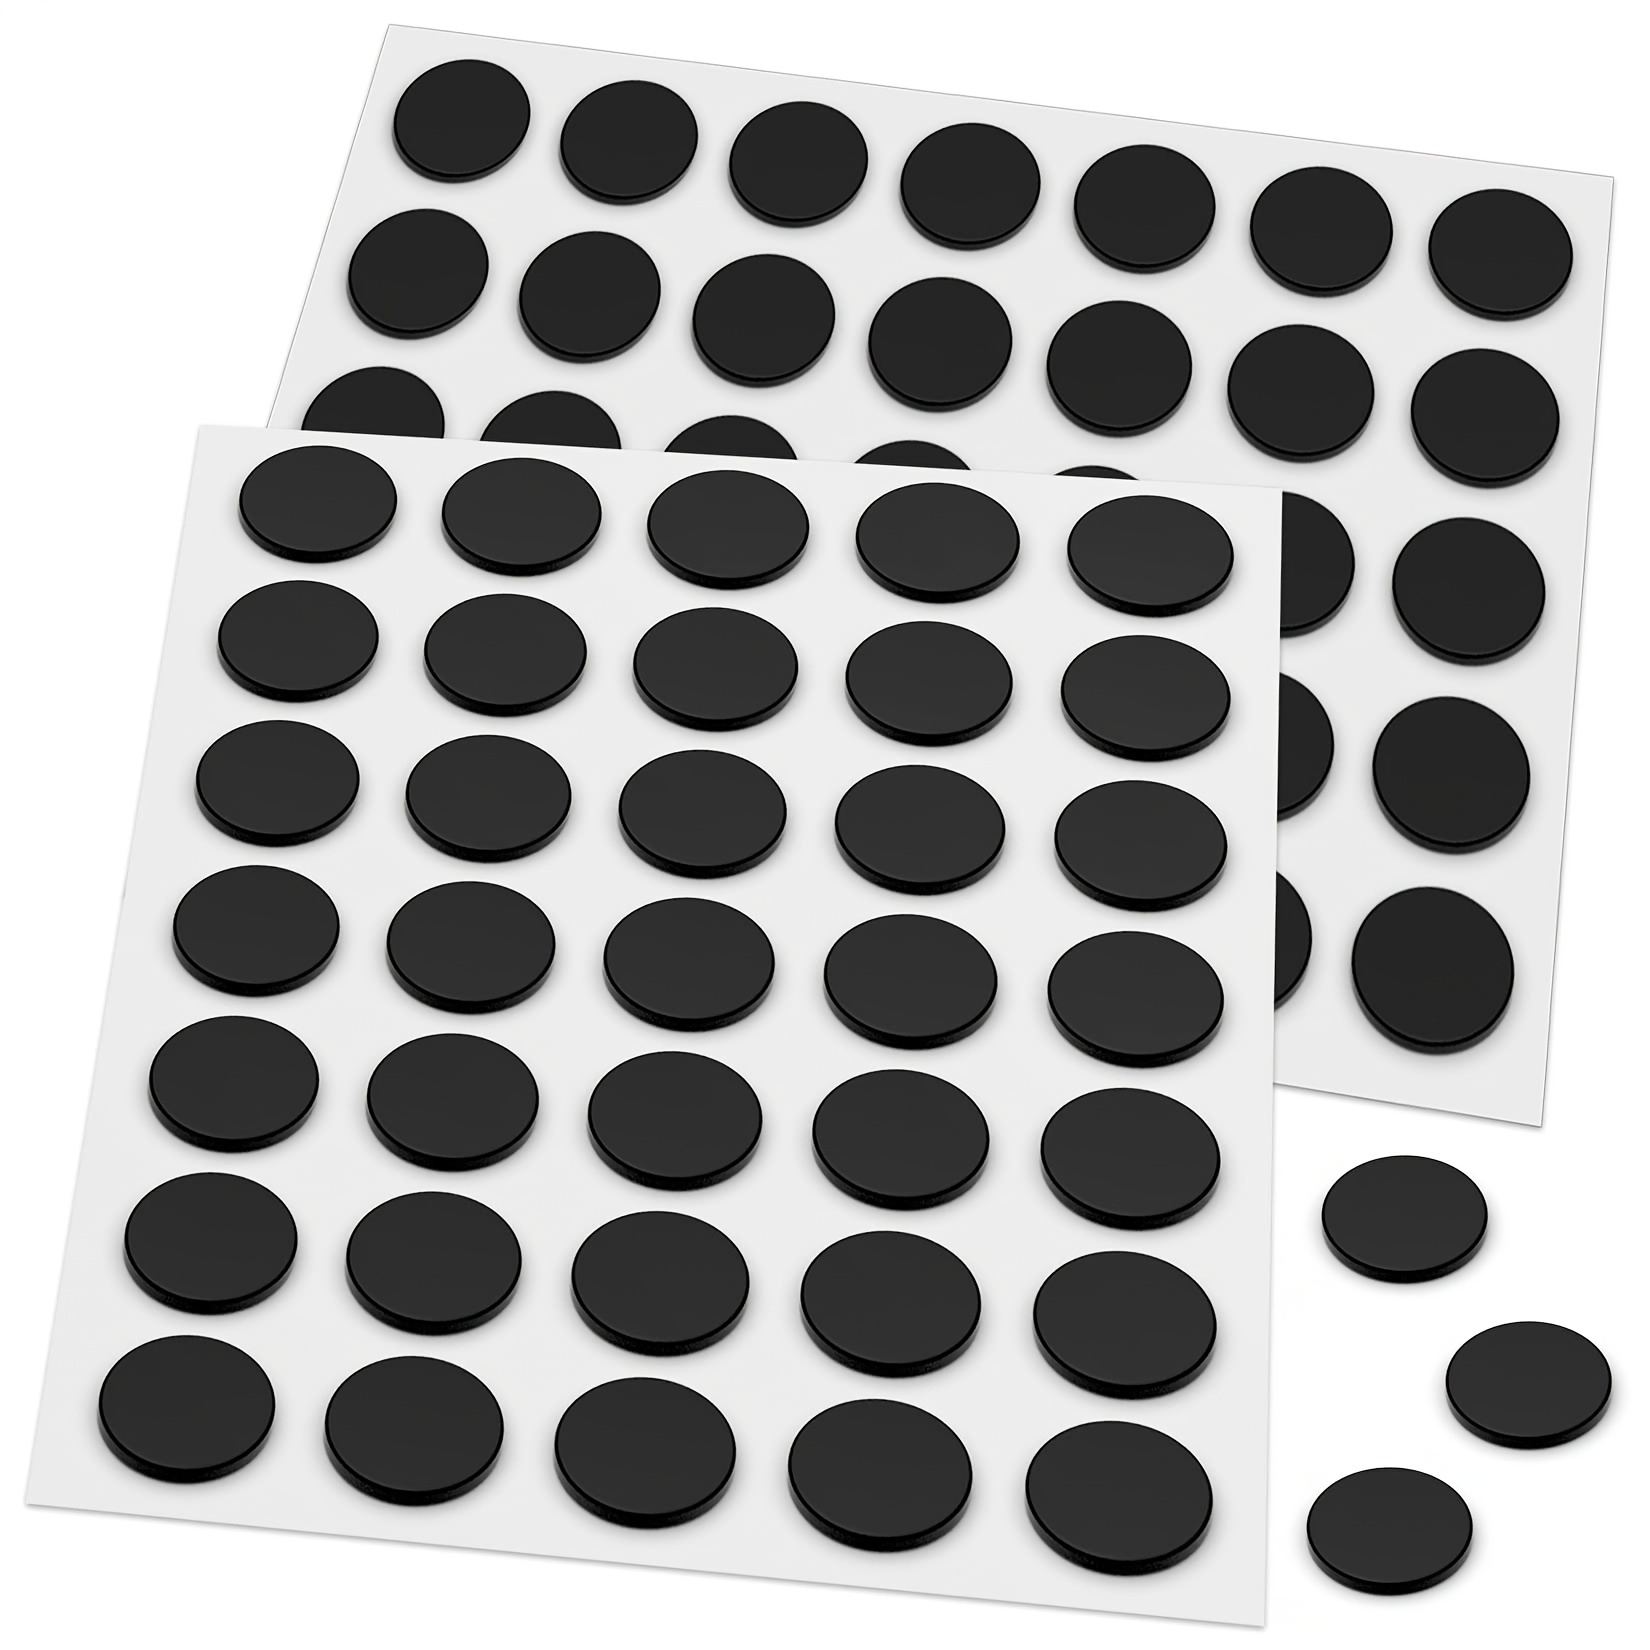 100pcs Flexible Magnetic Dot with Self Adhesive, Trianu Round Small Magnetic Stickers with Adhesive Backing Peel & Stick Magnets Stickers for Crafts